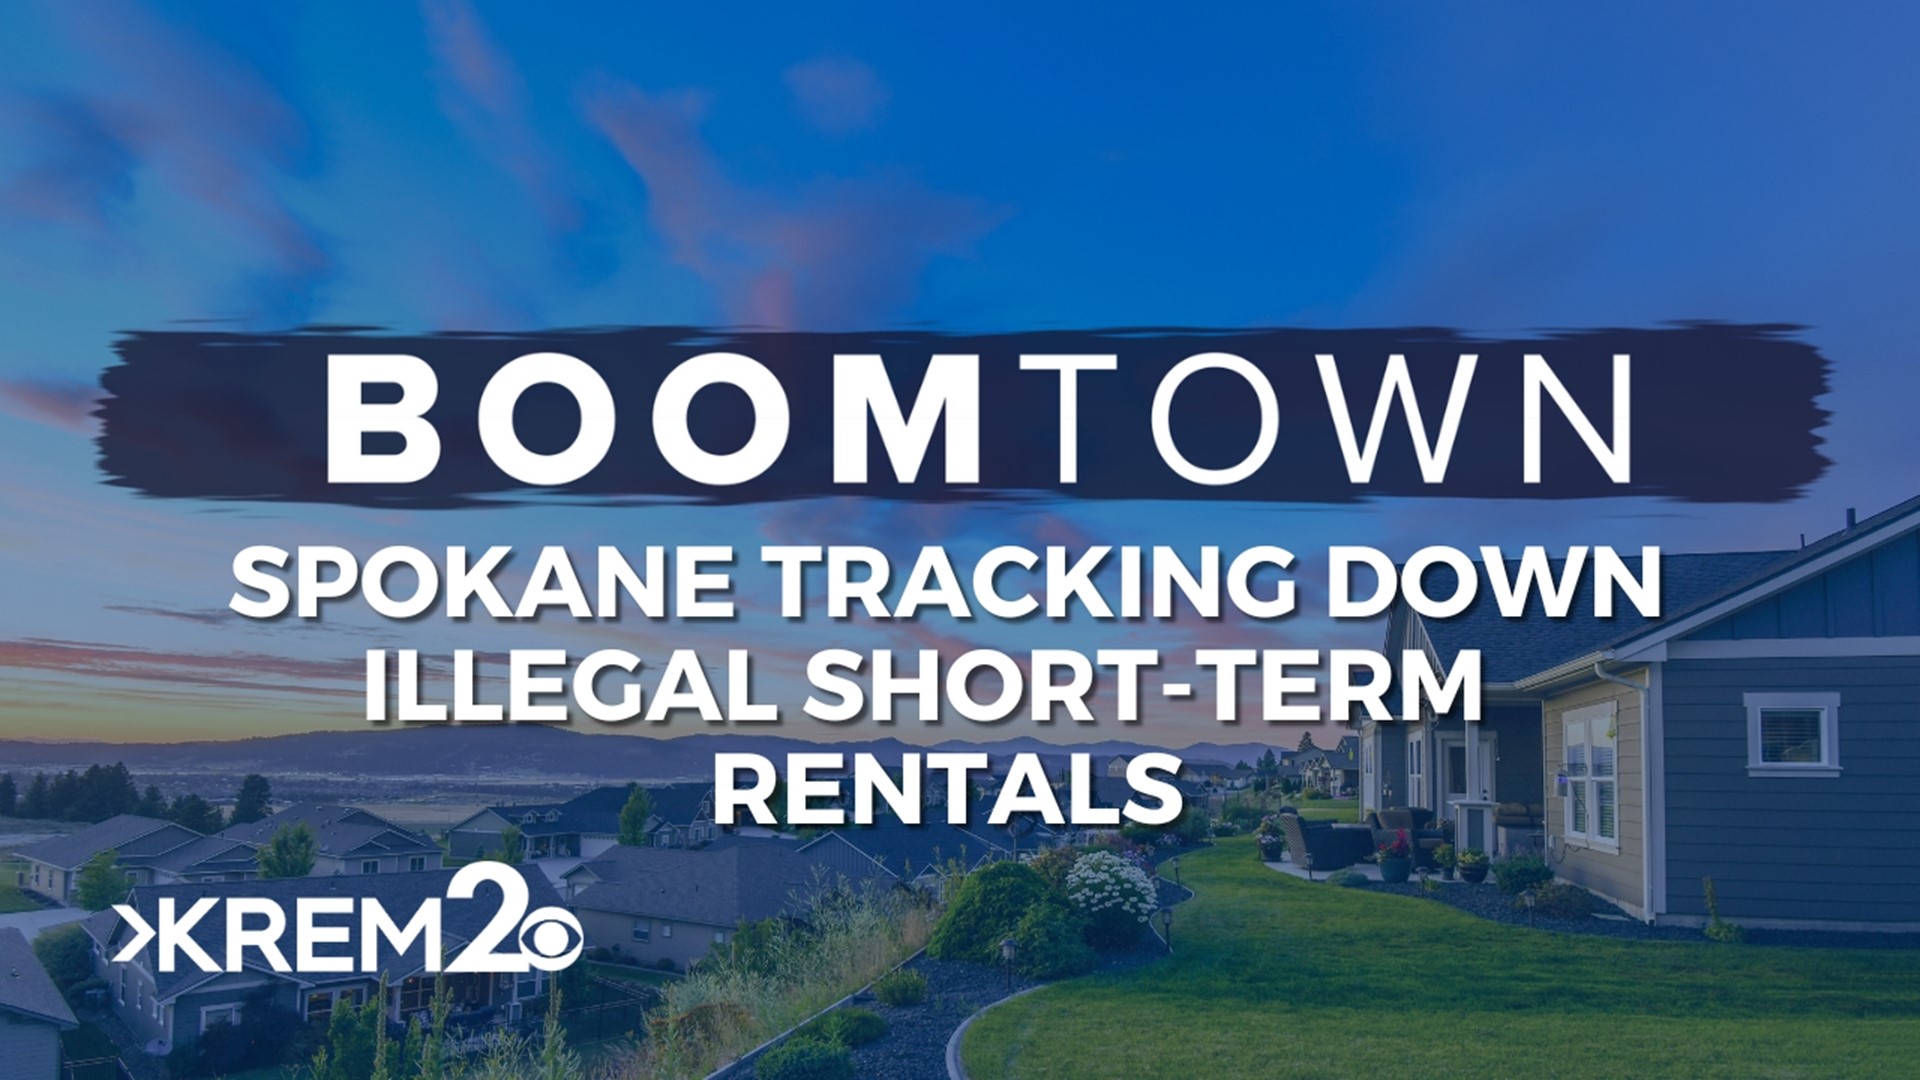 There are 648 short term rentals that operate illegally in Spokane. Only 44 of them have permits. Now, the city is proposing a new code to make changes.